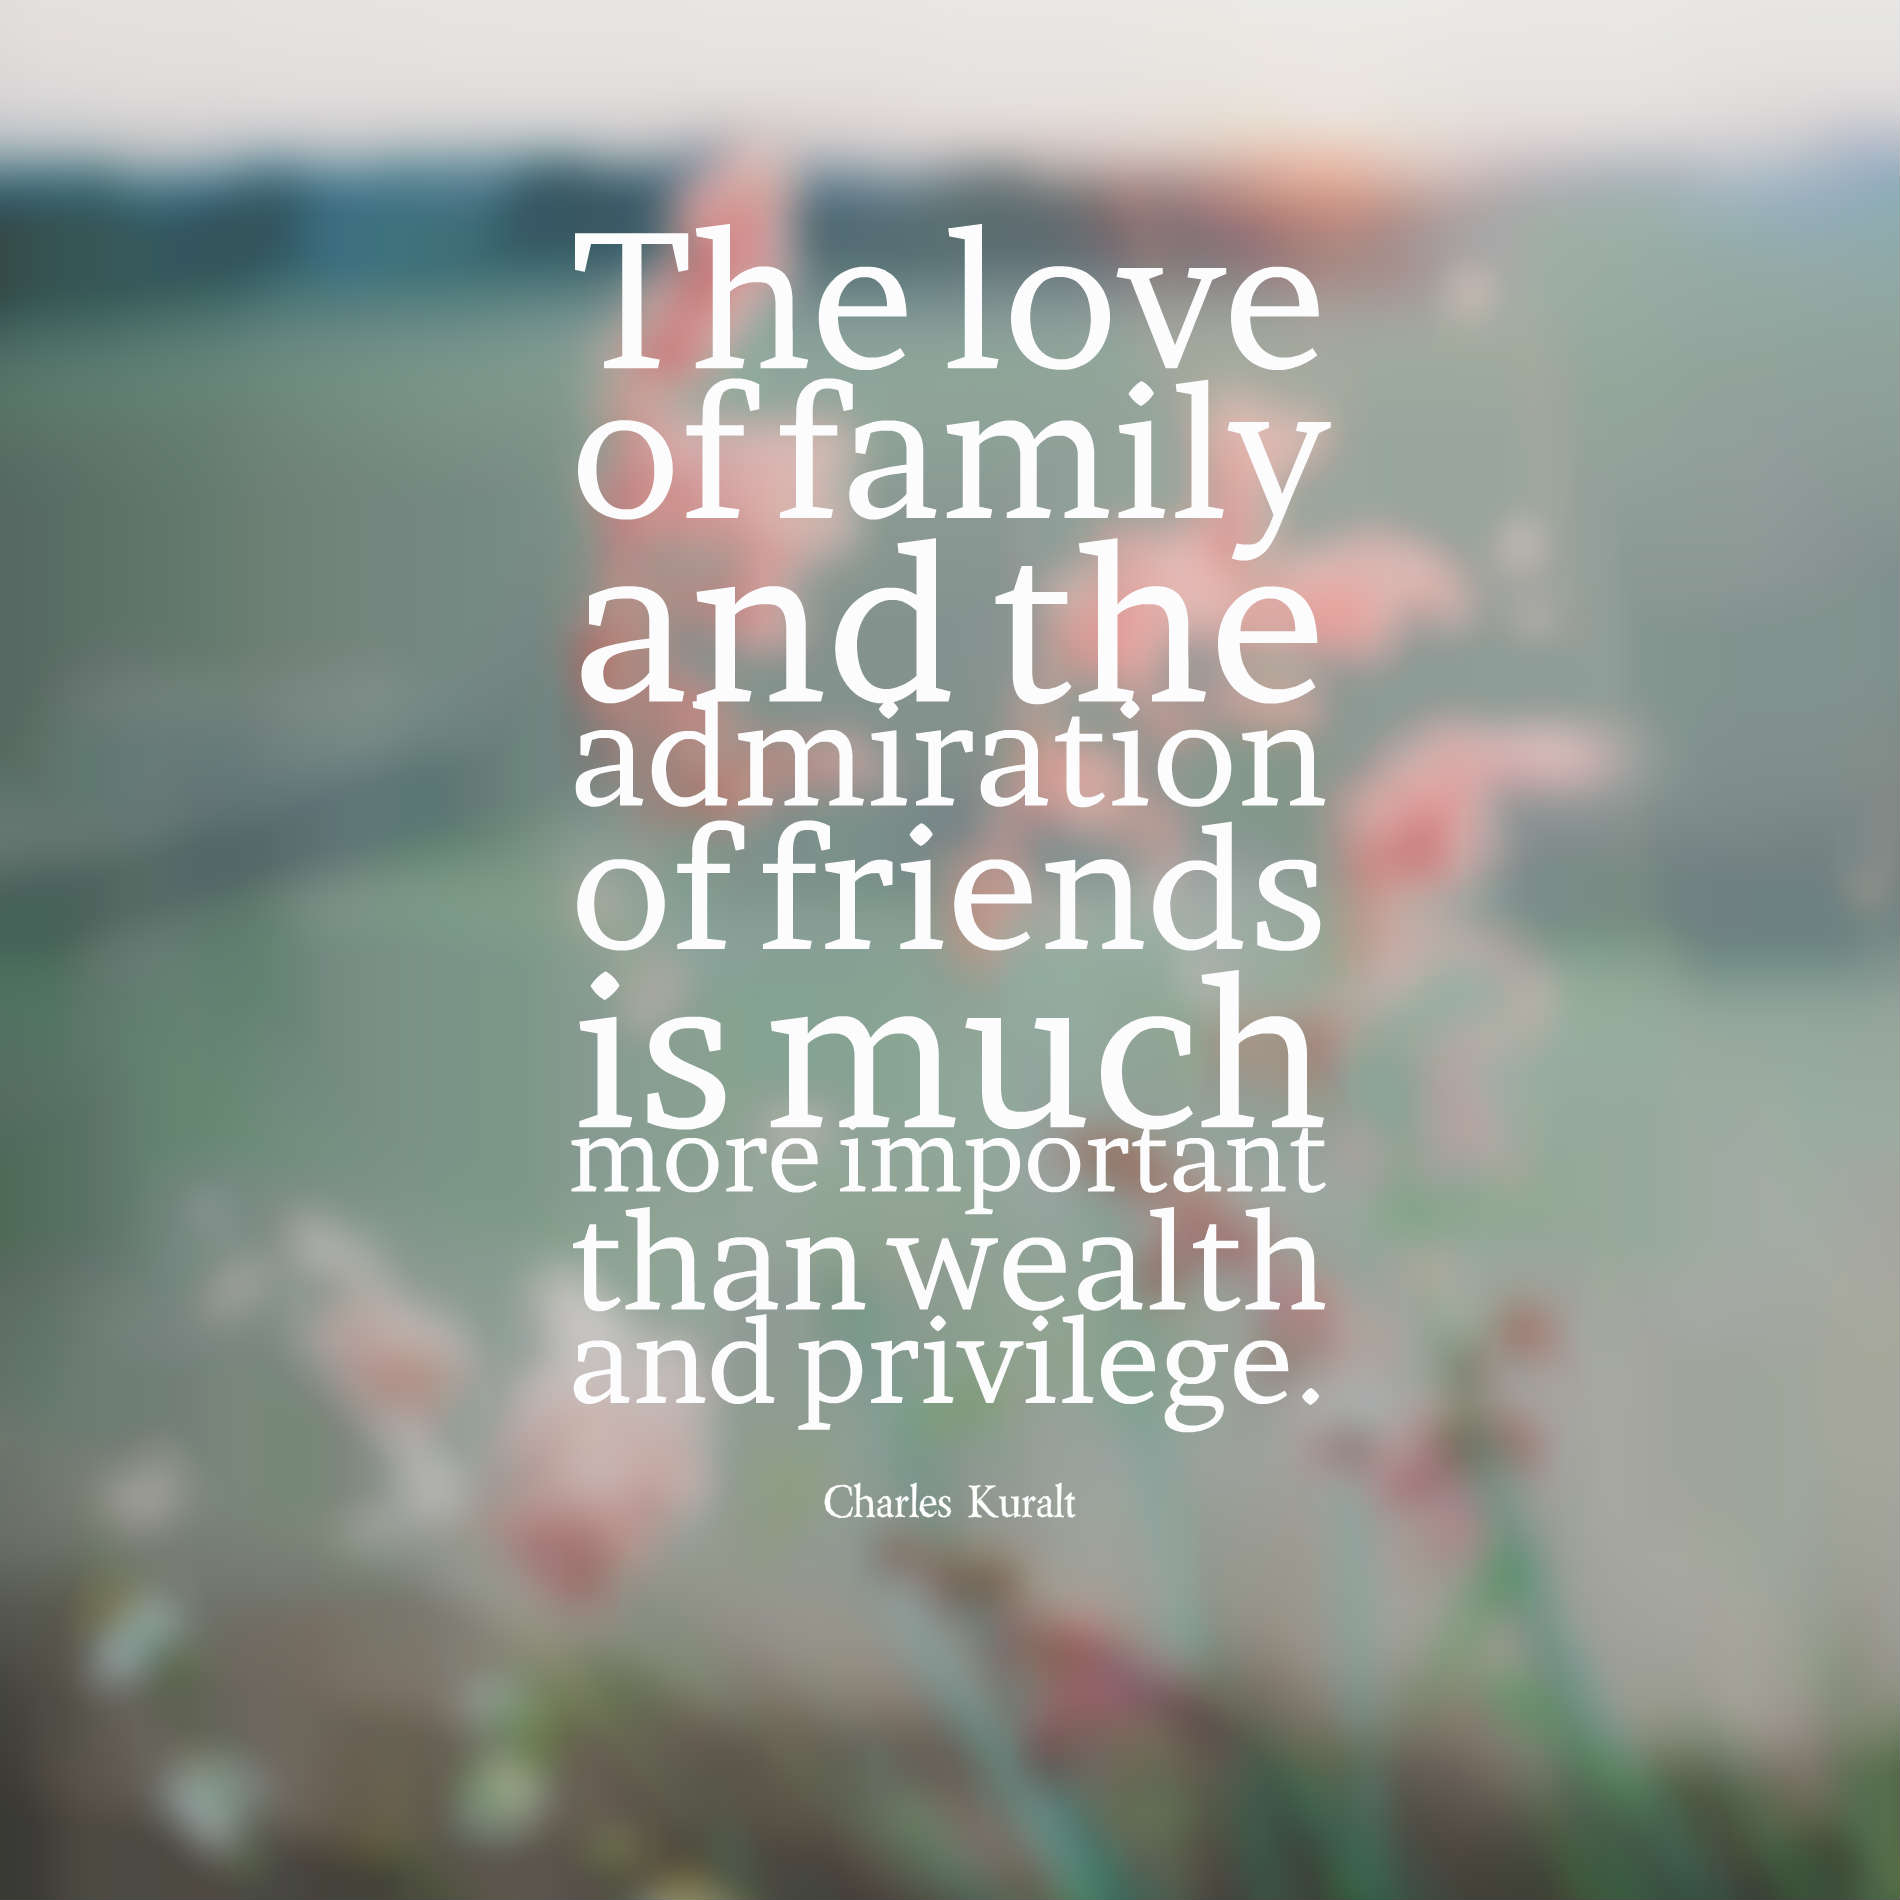 The love of family and the admiration of friends is much more important than wealth and privilege. Charles Kuralt